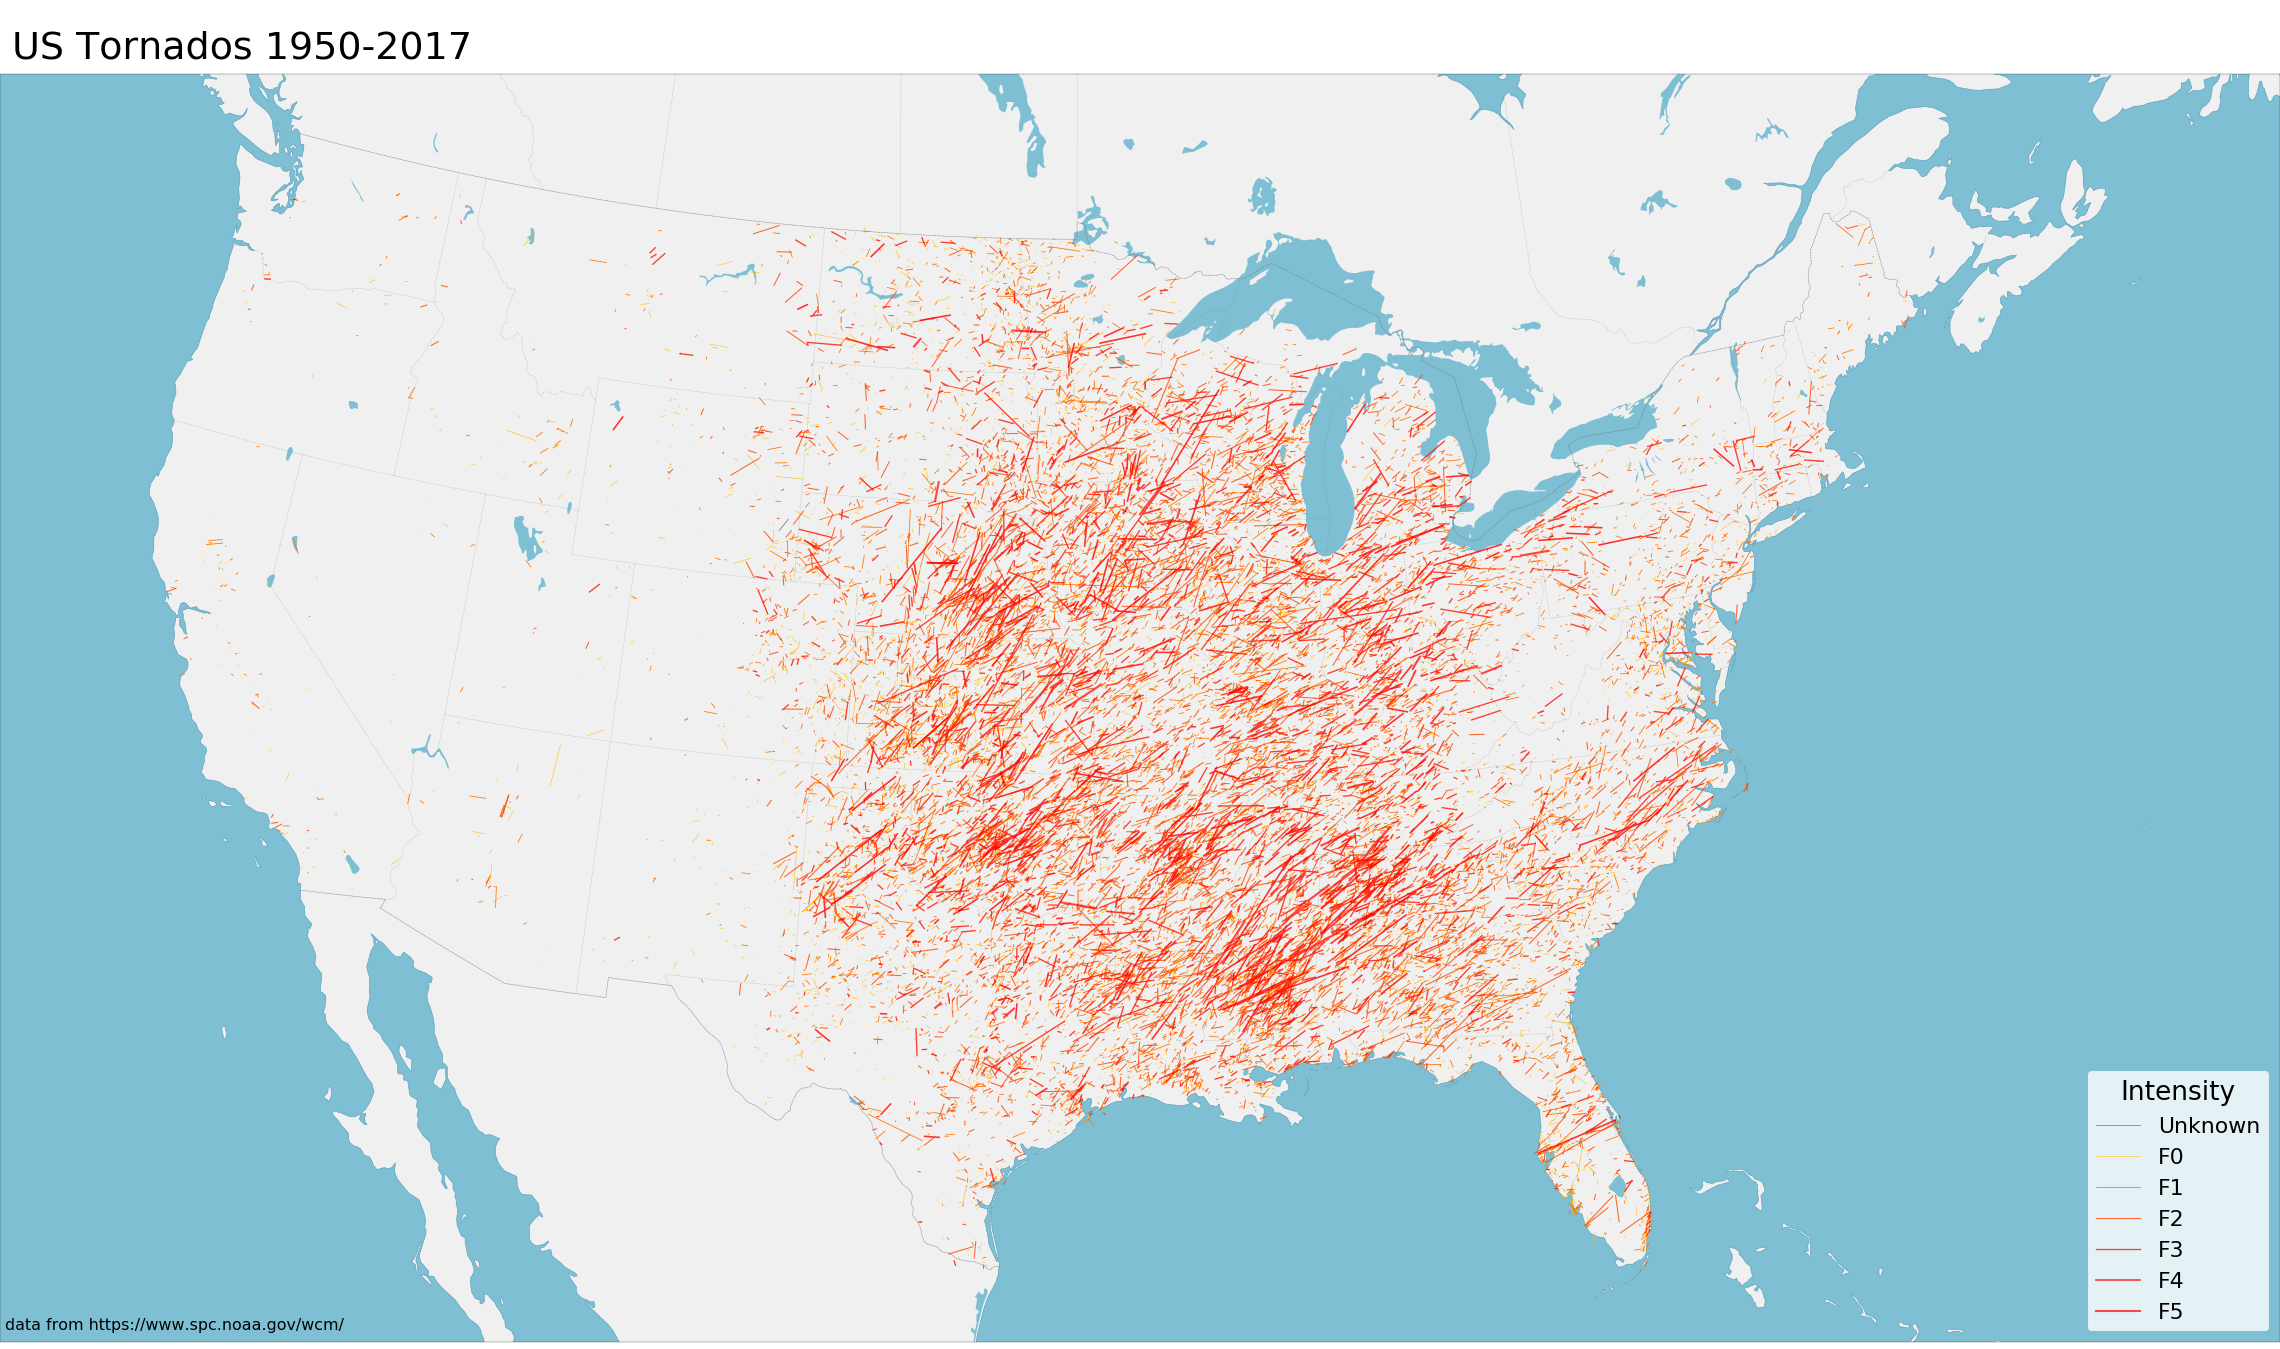 map of US with traces of tornado paths